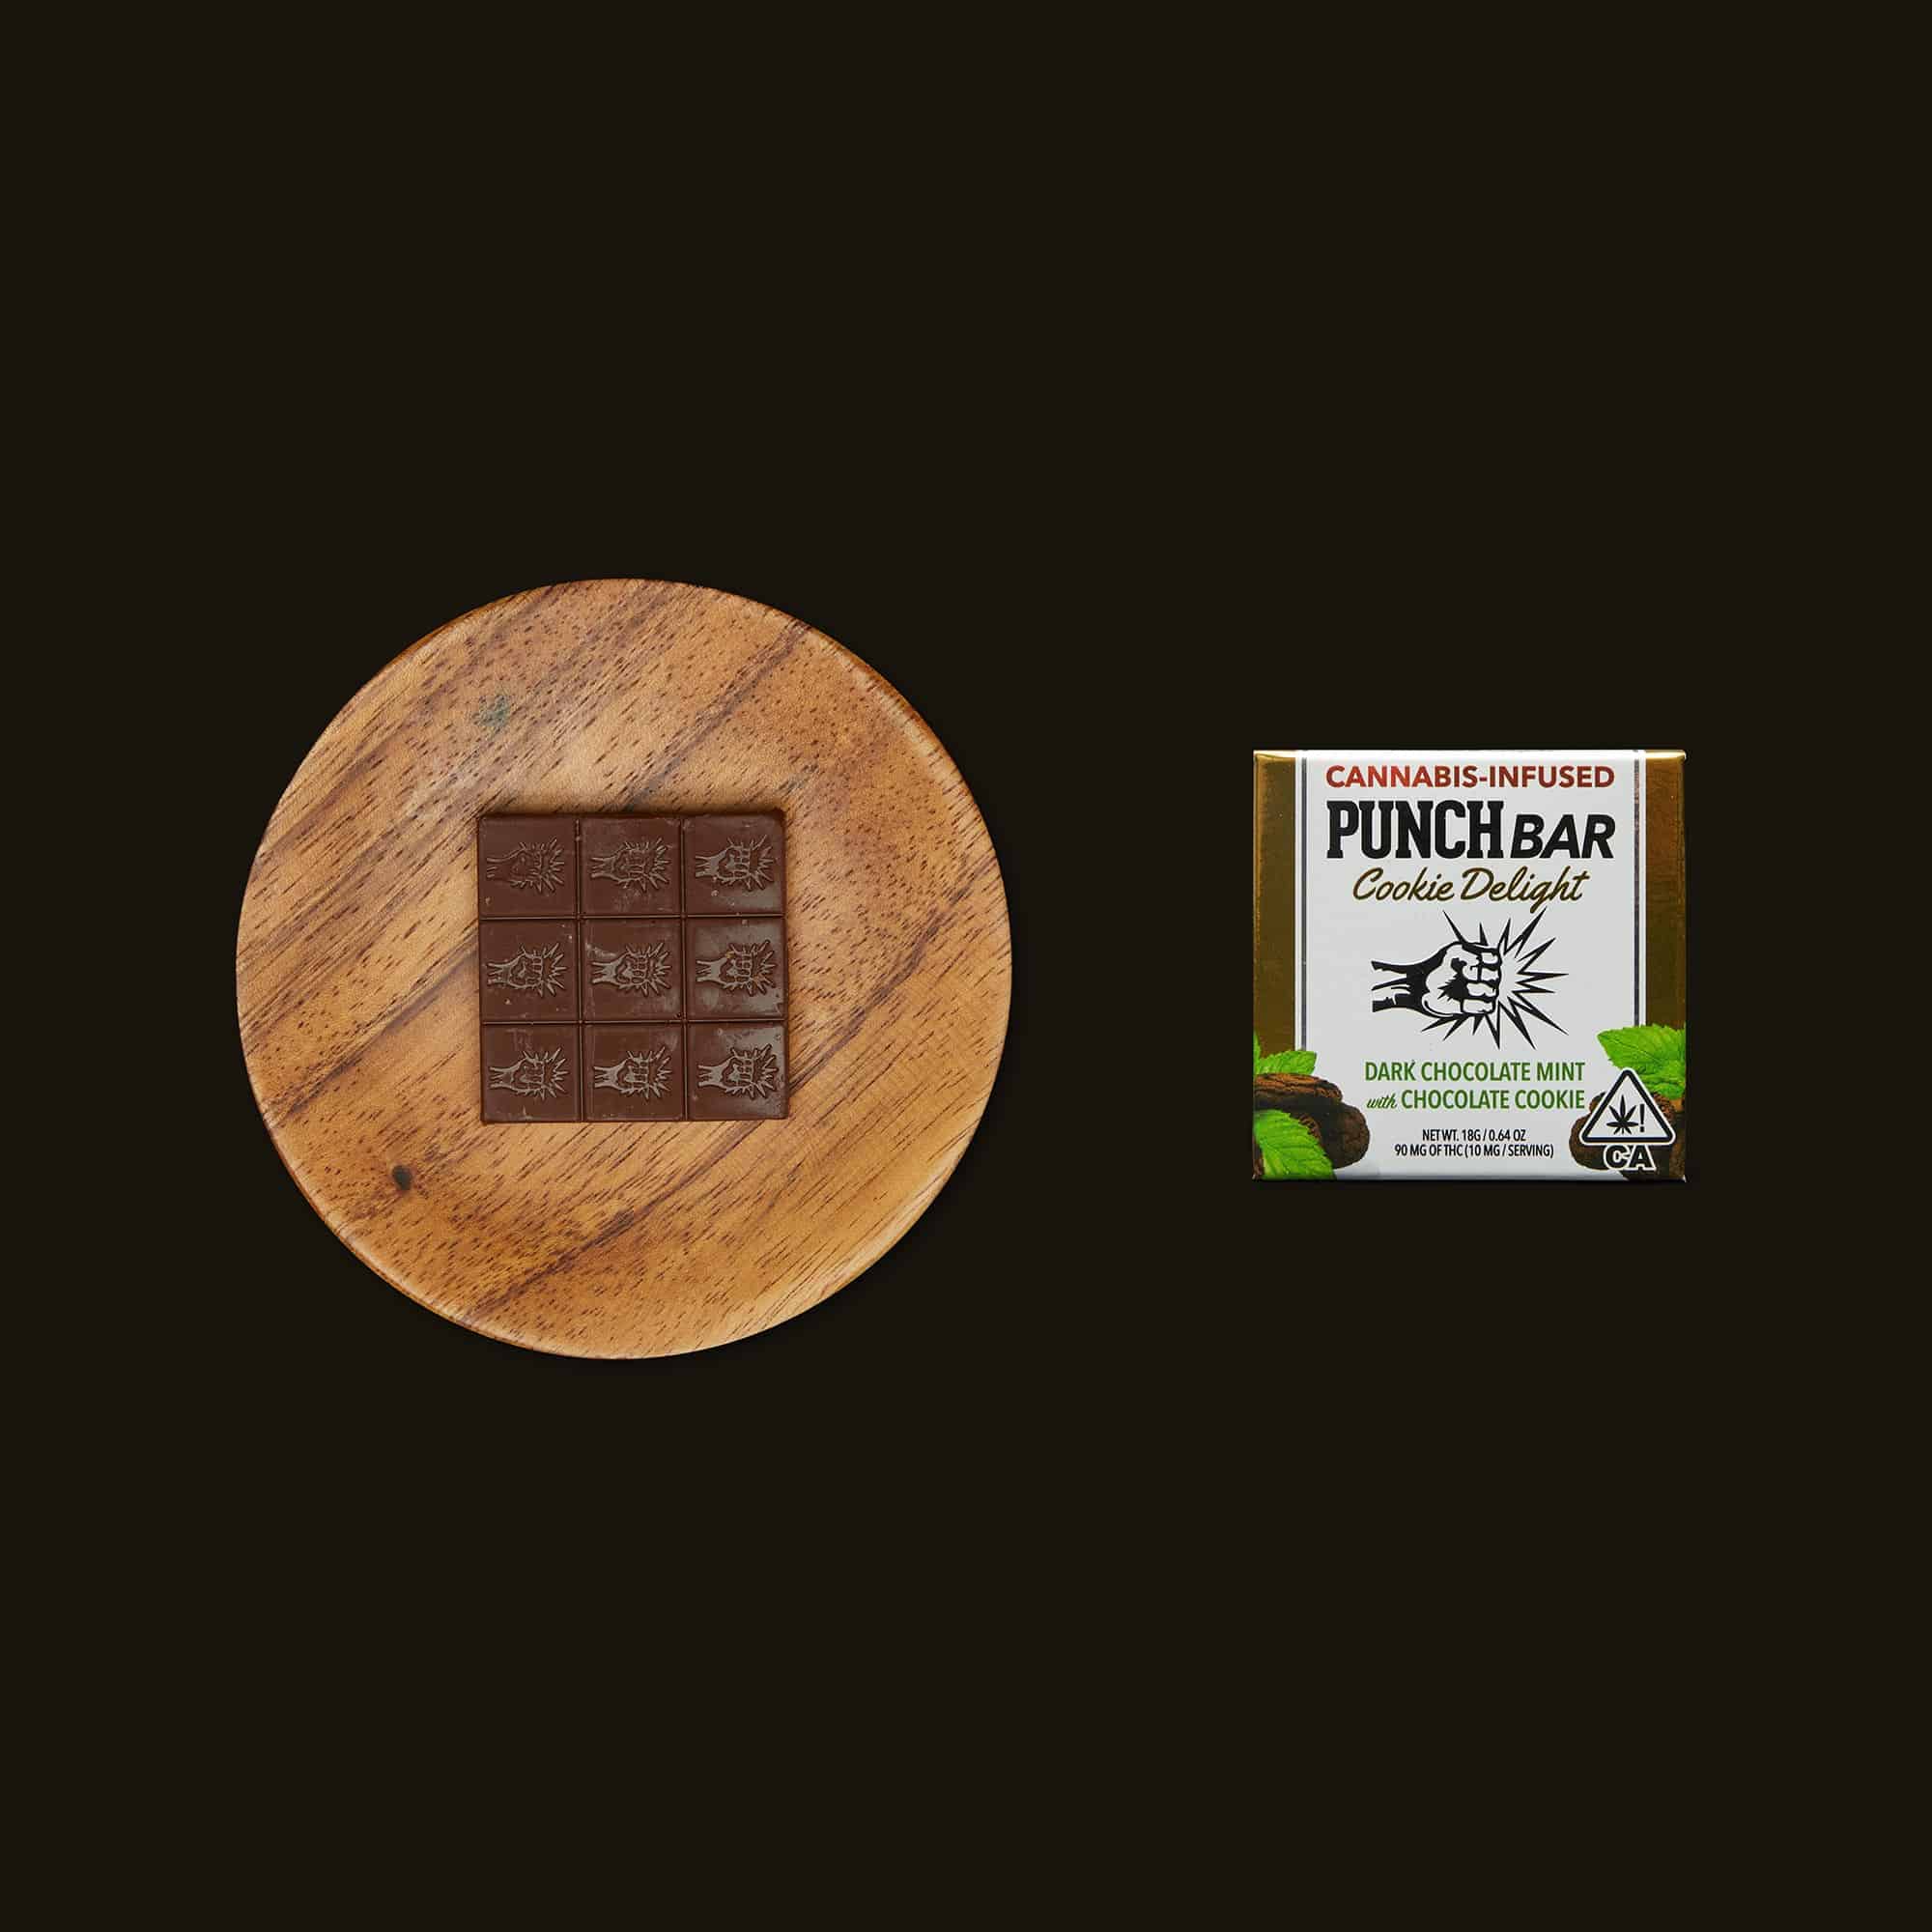 THC Edibles - Cookie Delight Dark Chocolate Mint with Chocolate Cookie